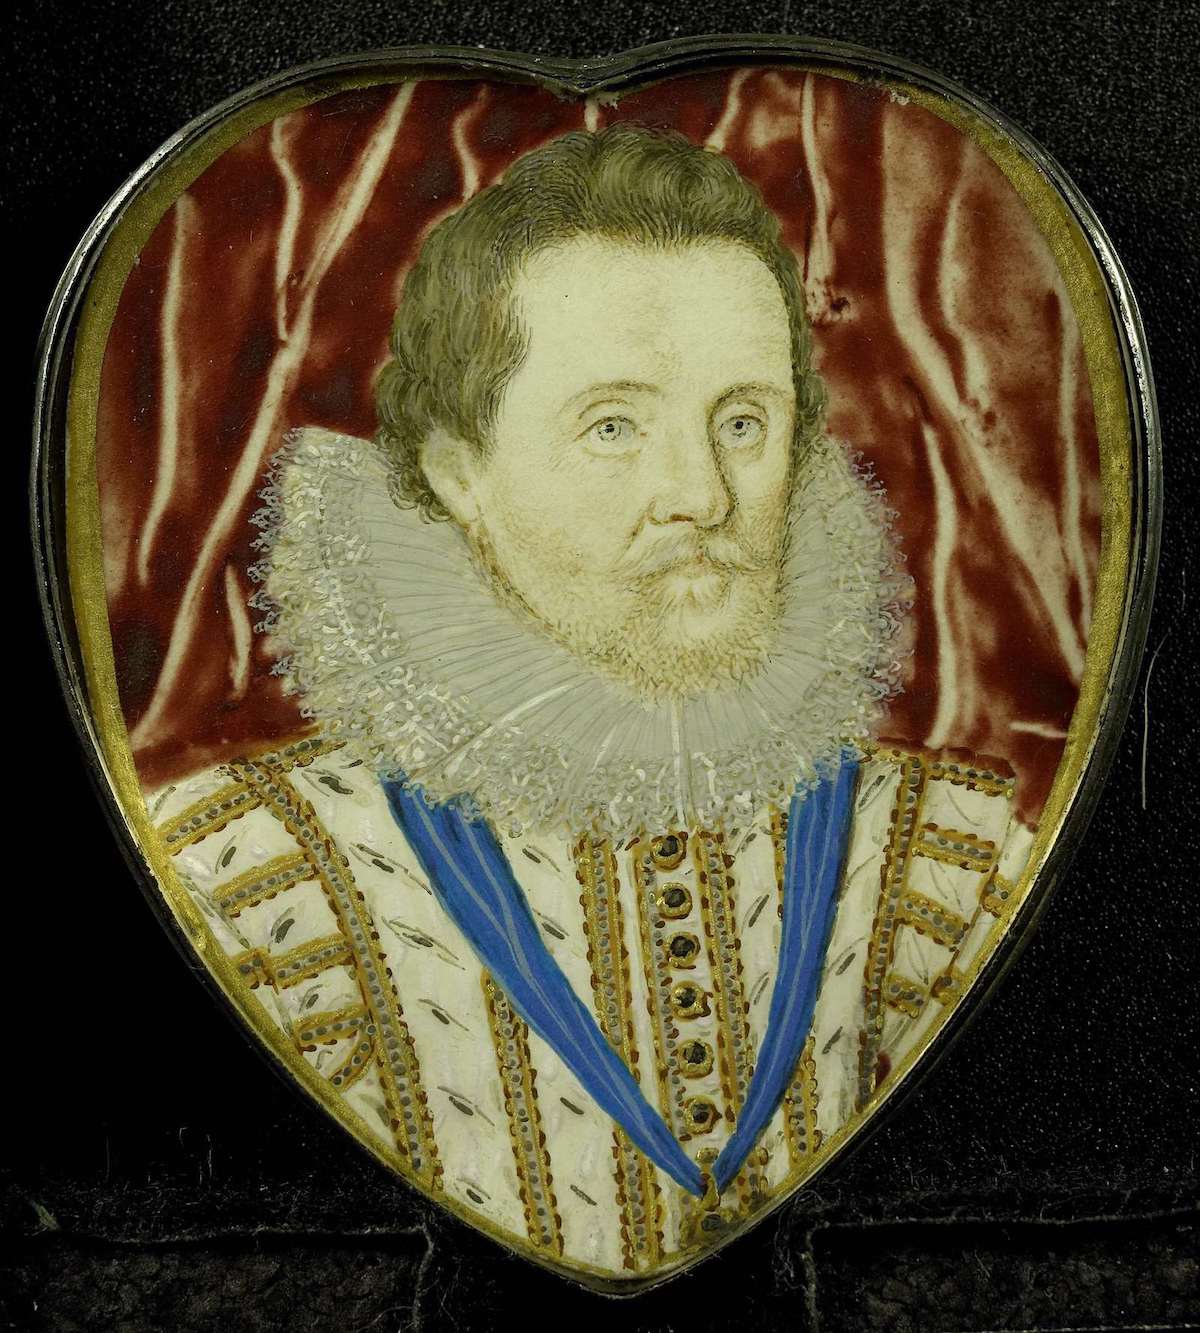 A portrait of King James VI of Scotland and I of England, by Lawrence Hilliard, c. 1600-1625. Rijksmuseum. Public Domain.